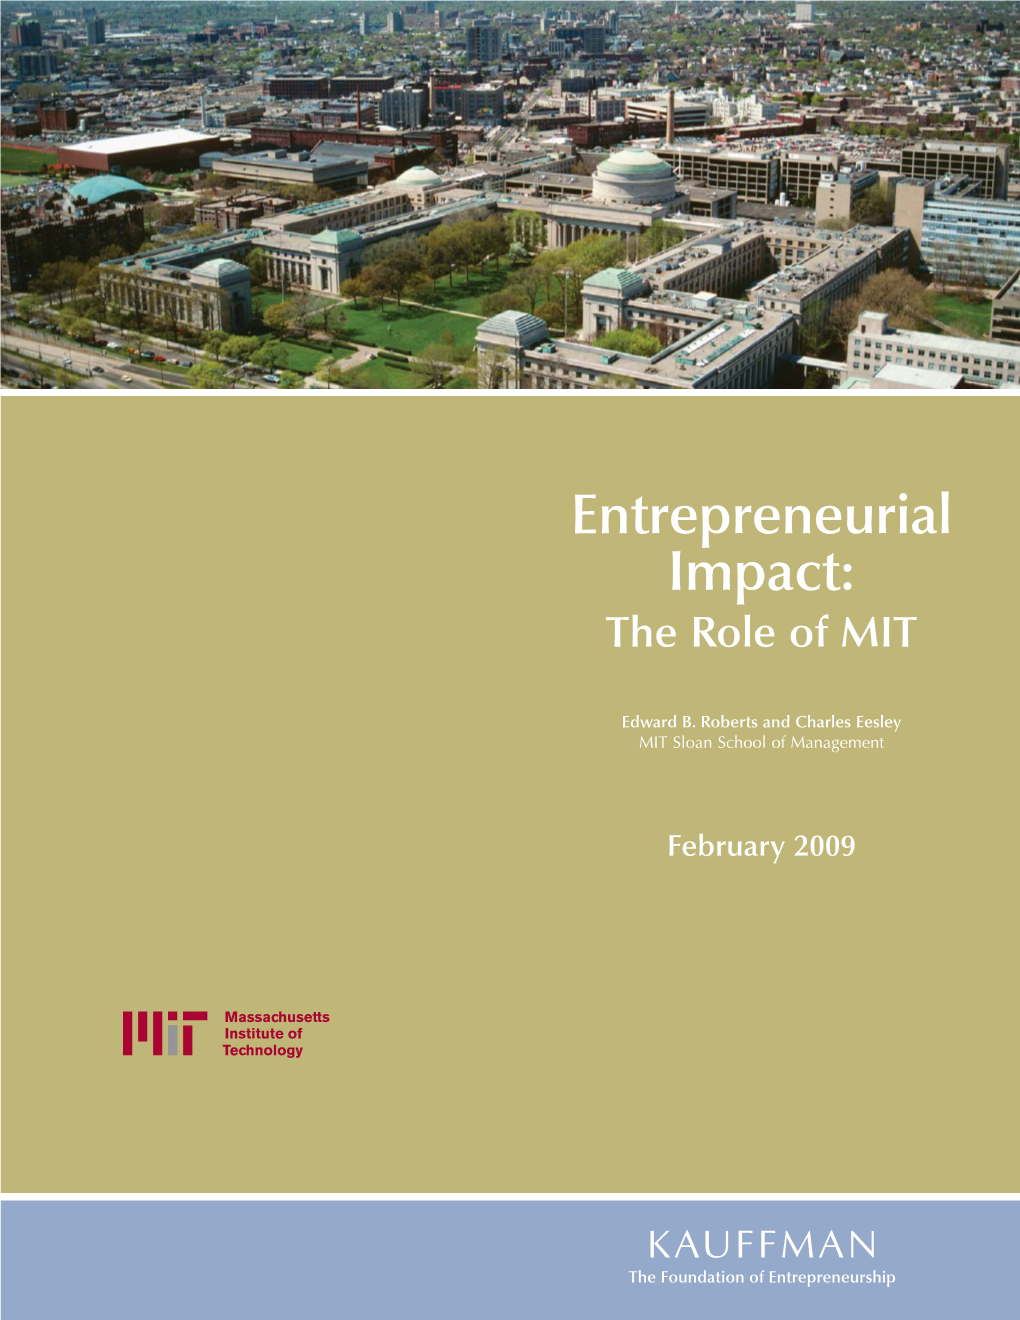 The Role of MIT